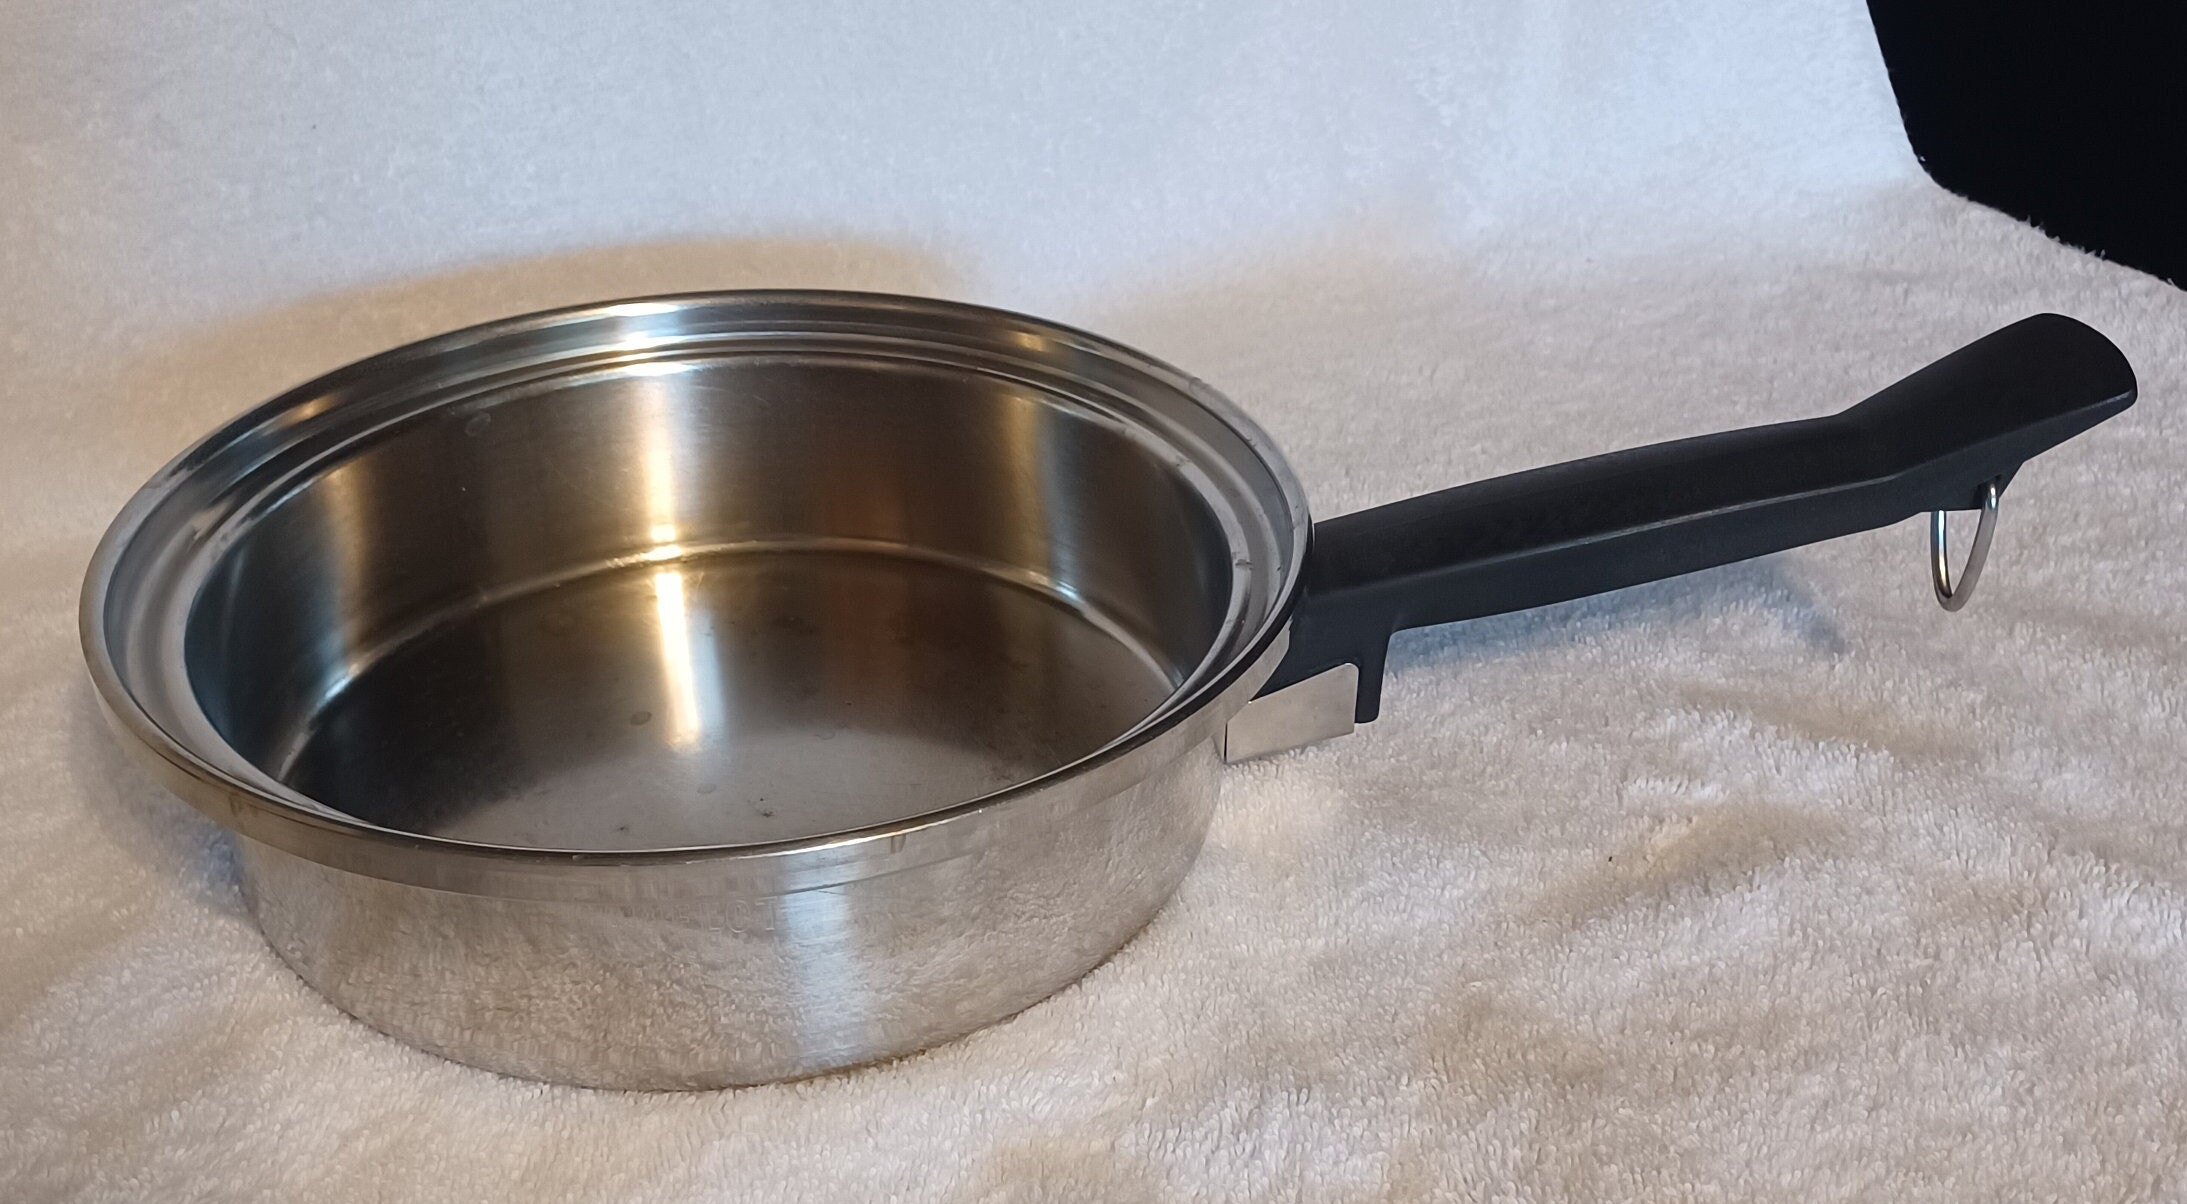 Royal Queen 5 Qt Multicore 5 ply 304 Stainless Steel pan and dome